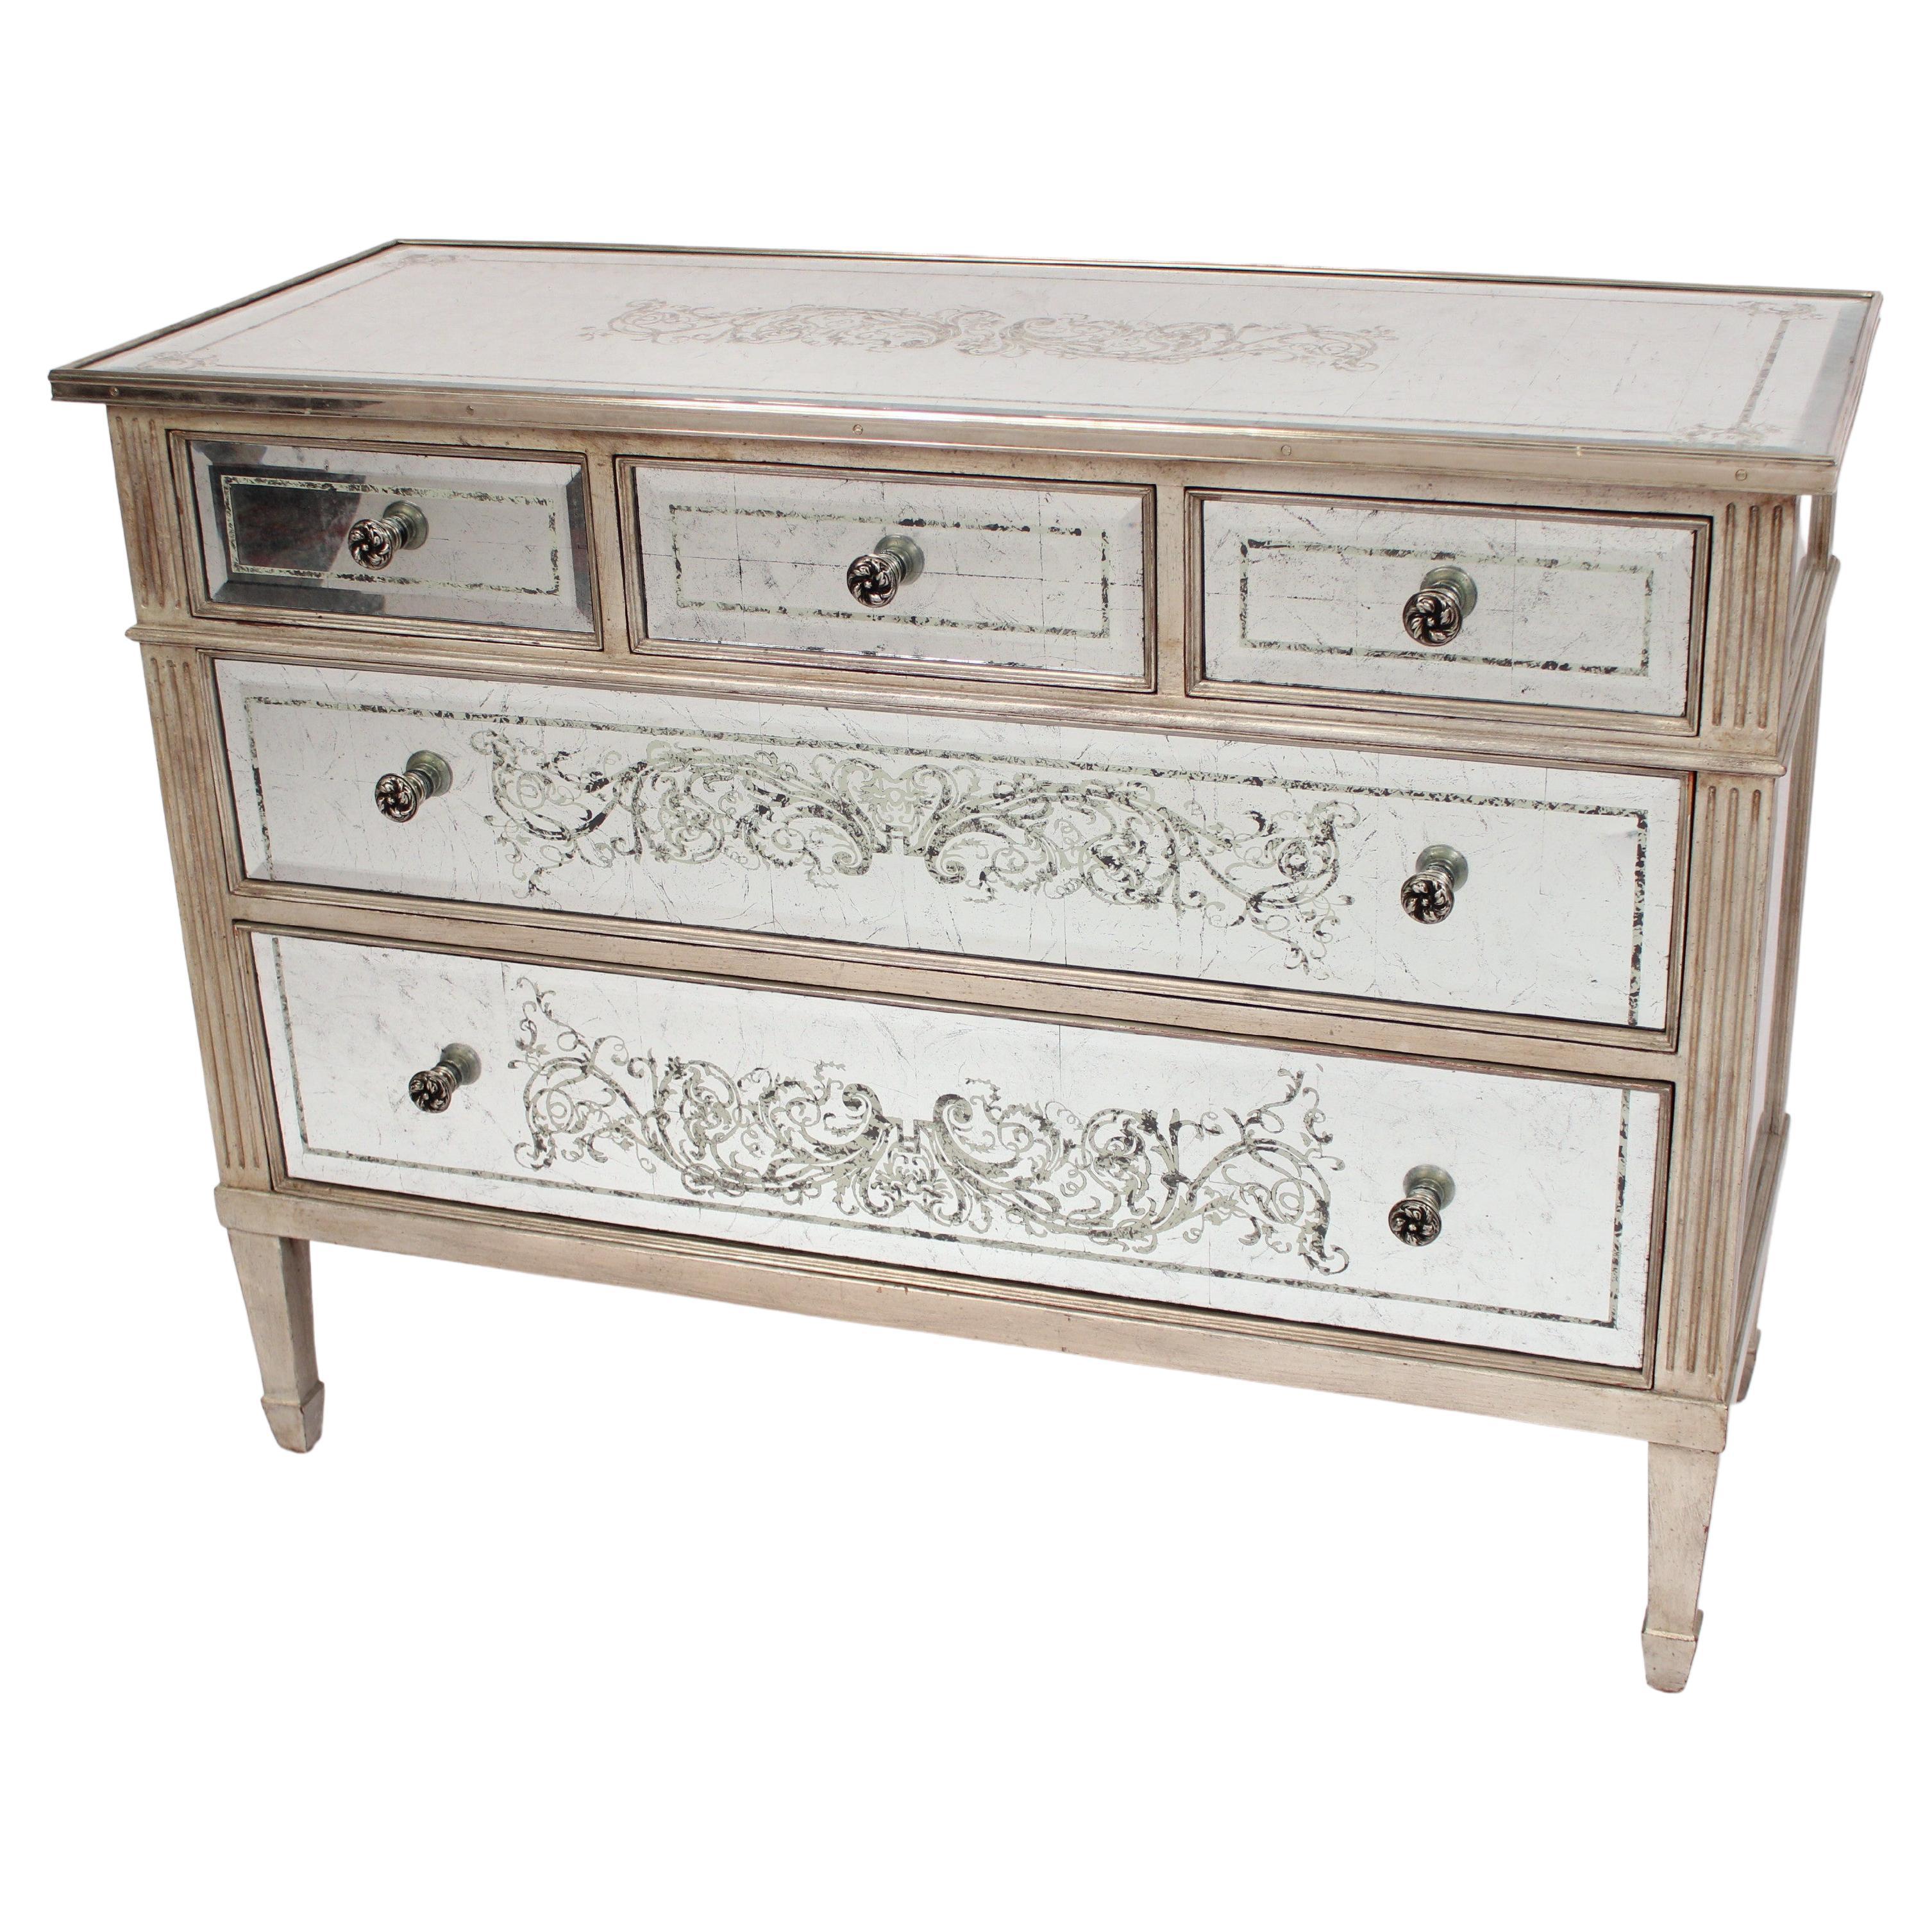 Louis XVI style Mirror Clad Chest of Drawers